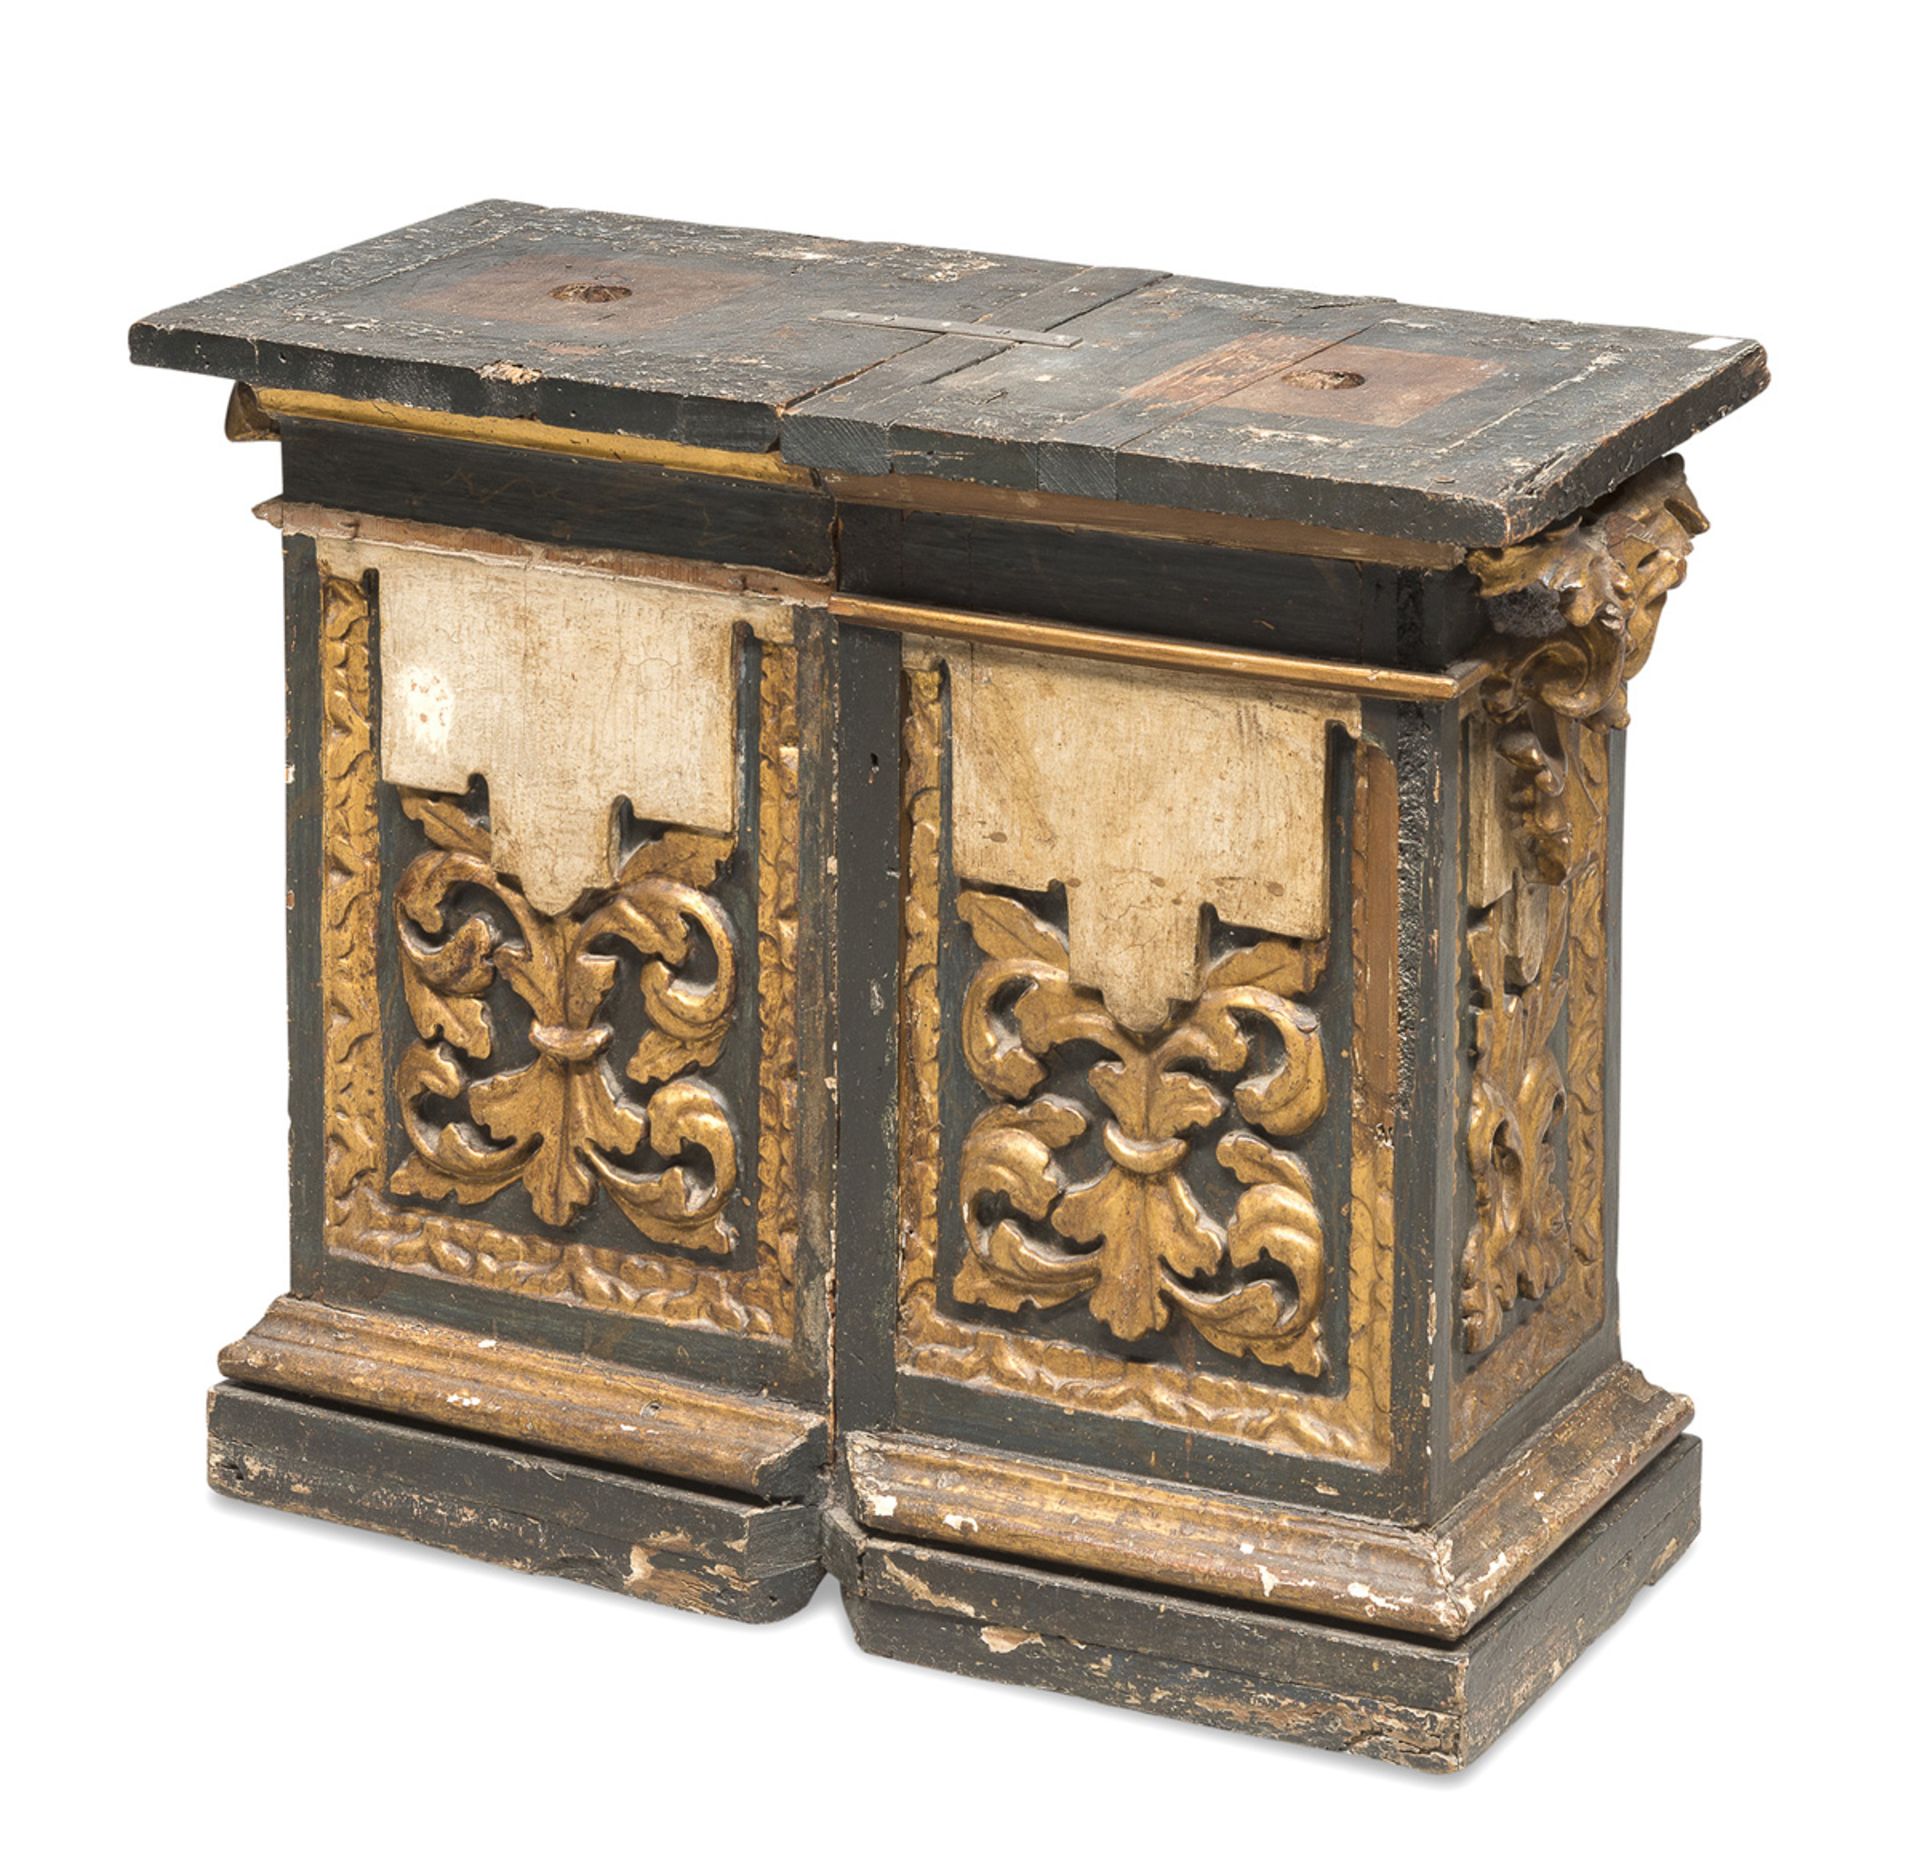 PEDESTAL IN LACQUERED WOOD - CENTRAL ITALY 18TH CENTURY